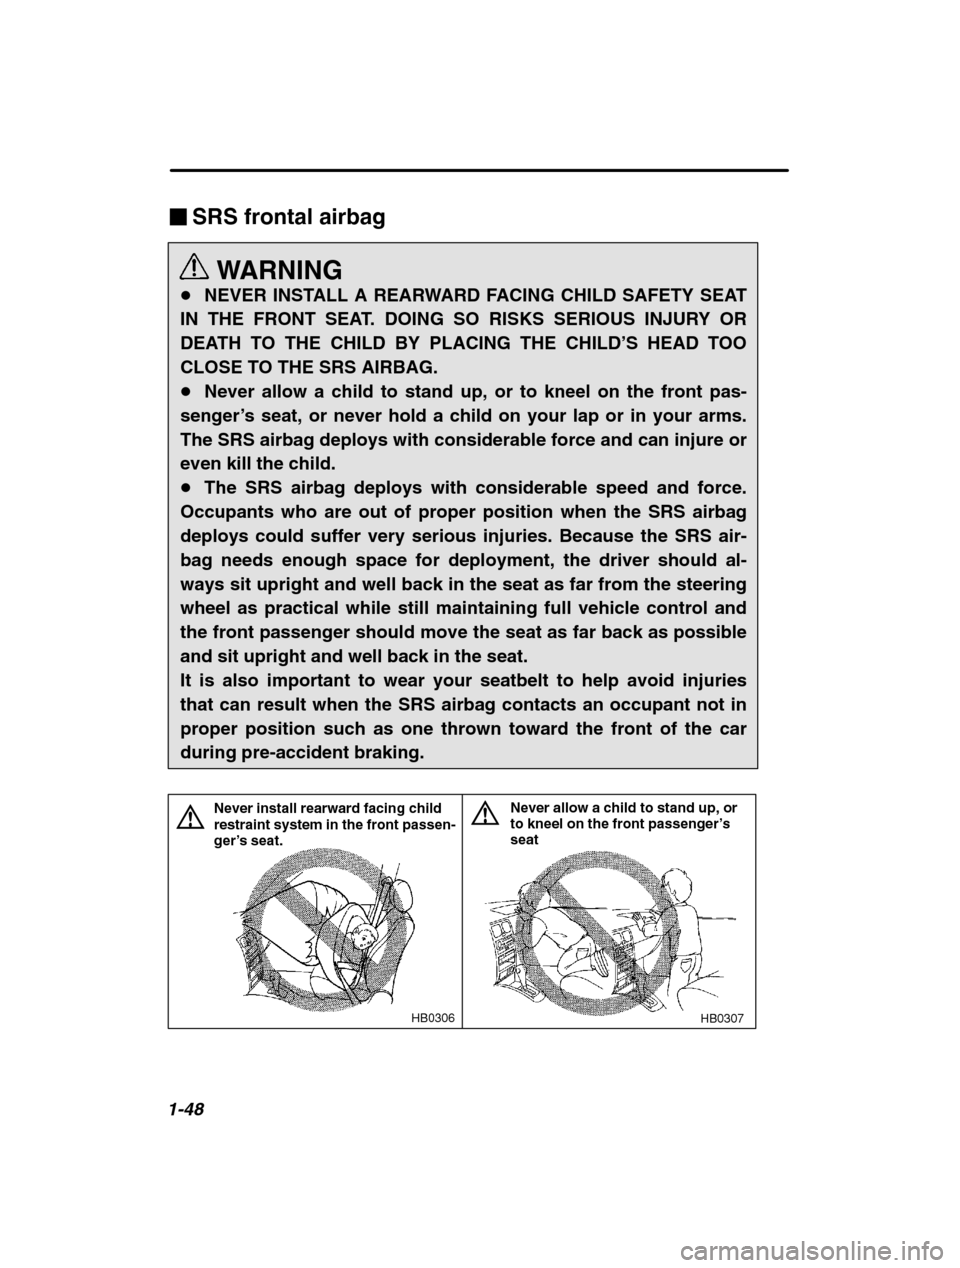 SUBARU OUTBACK 2002 3.G Owners Manual 1-48
�SRS frontal airbag
WARNING
� NEVER INSTALL A REARWARD FACING CHILD SAFETY SEAT
IN THE FRONT SEAT. DOING SO RISKS SERIOUS INJURY OR 
DEATH TO THE CHILD BY PLACING THE CHILD ’S HEAD TOO
CLOSE TO